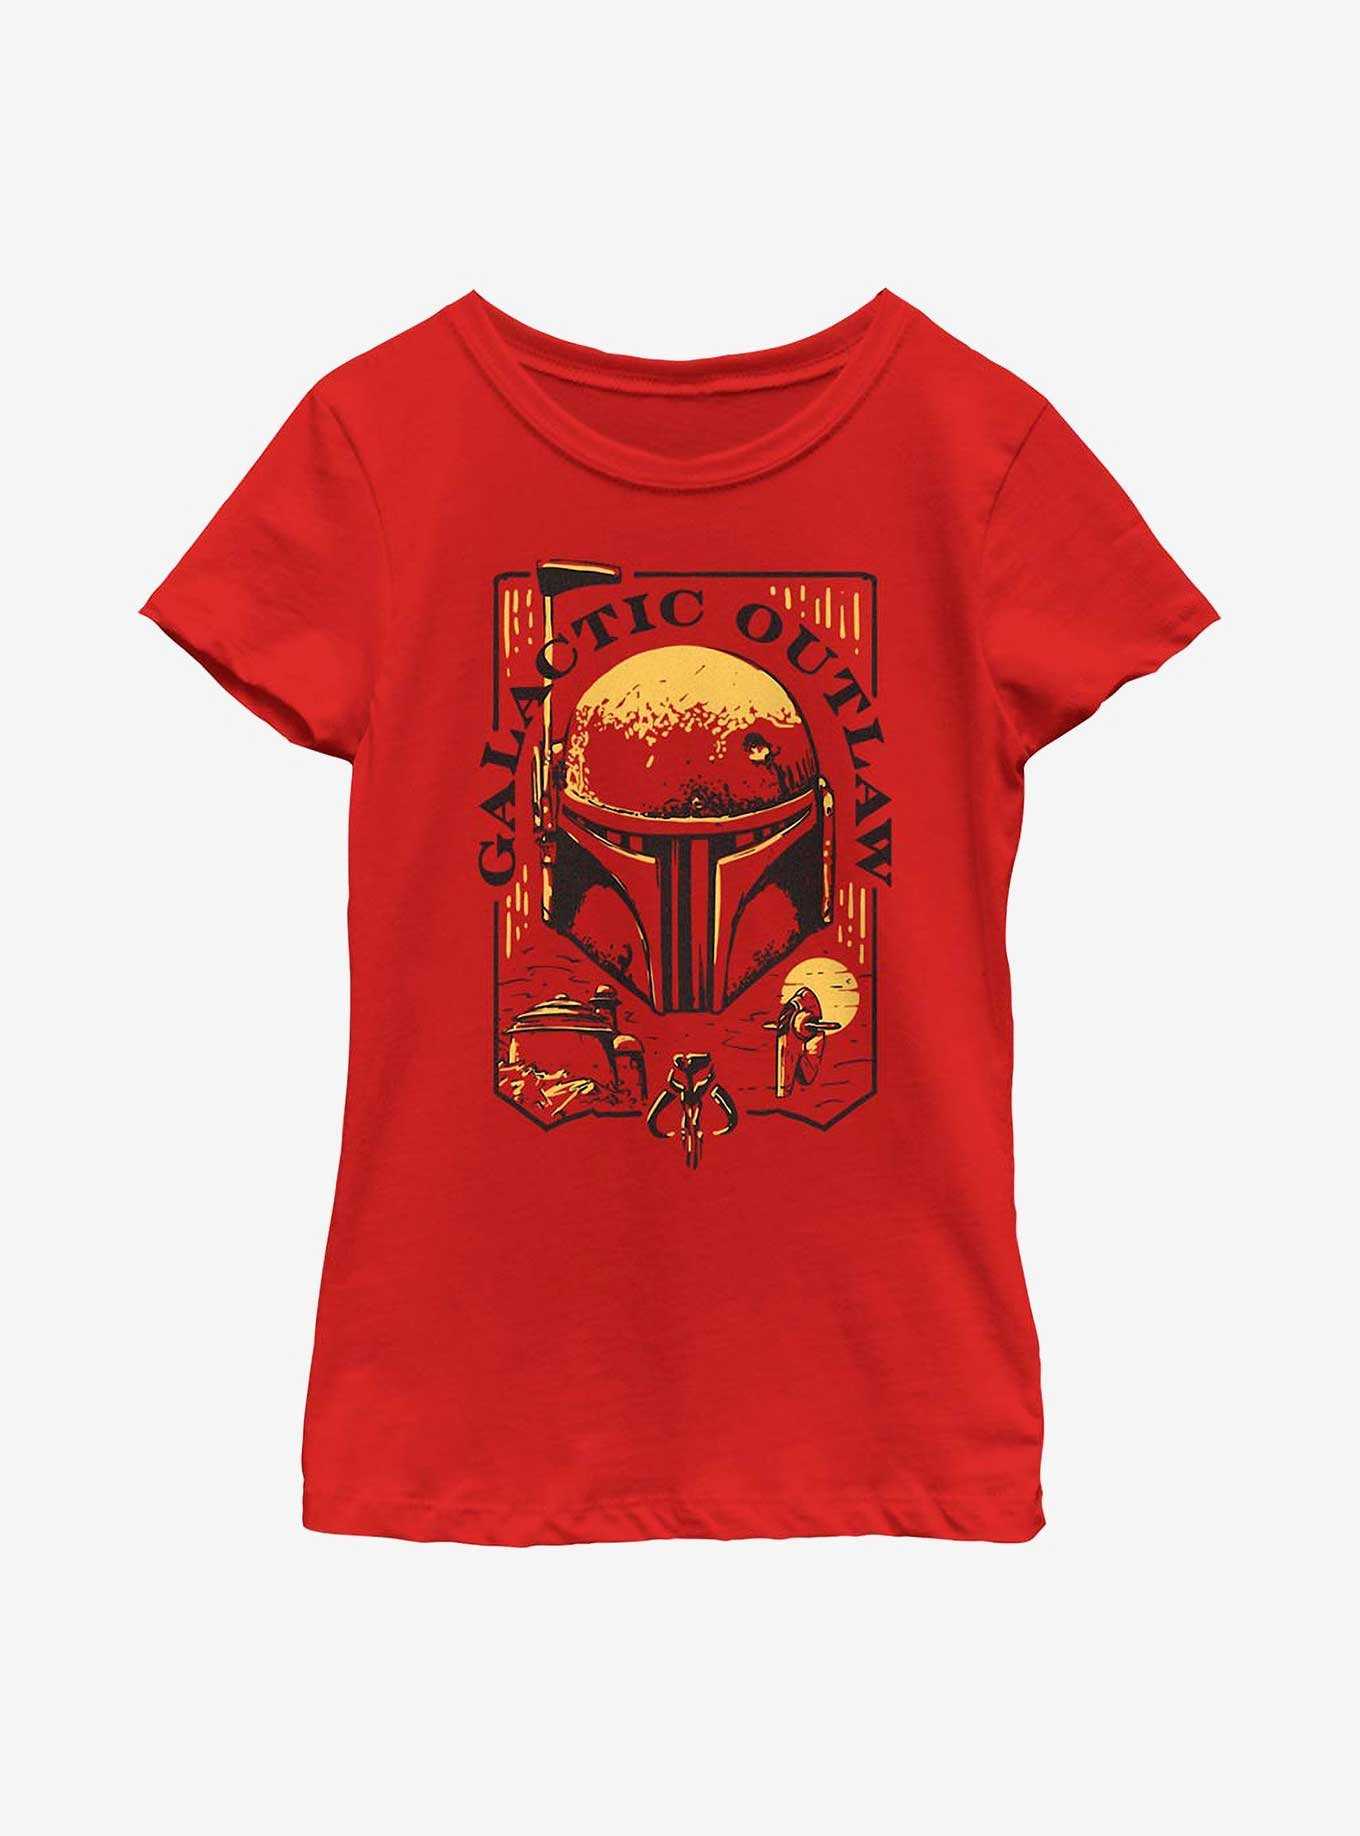 Star Wars: The Book Of Boba Fett Galactic Outlaw Logo Youth Girls T-Shirt, , hi-res